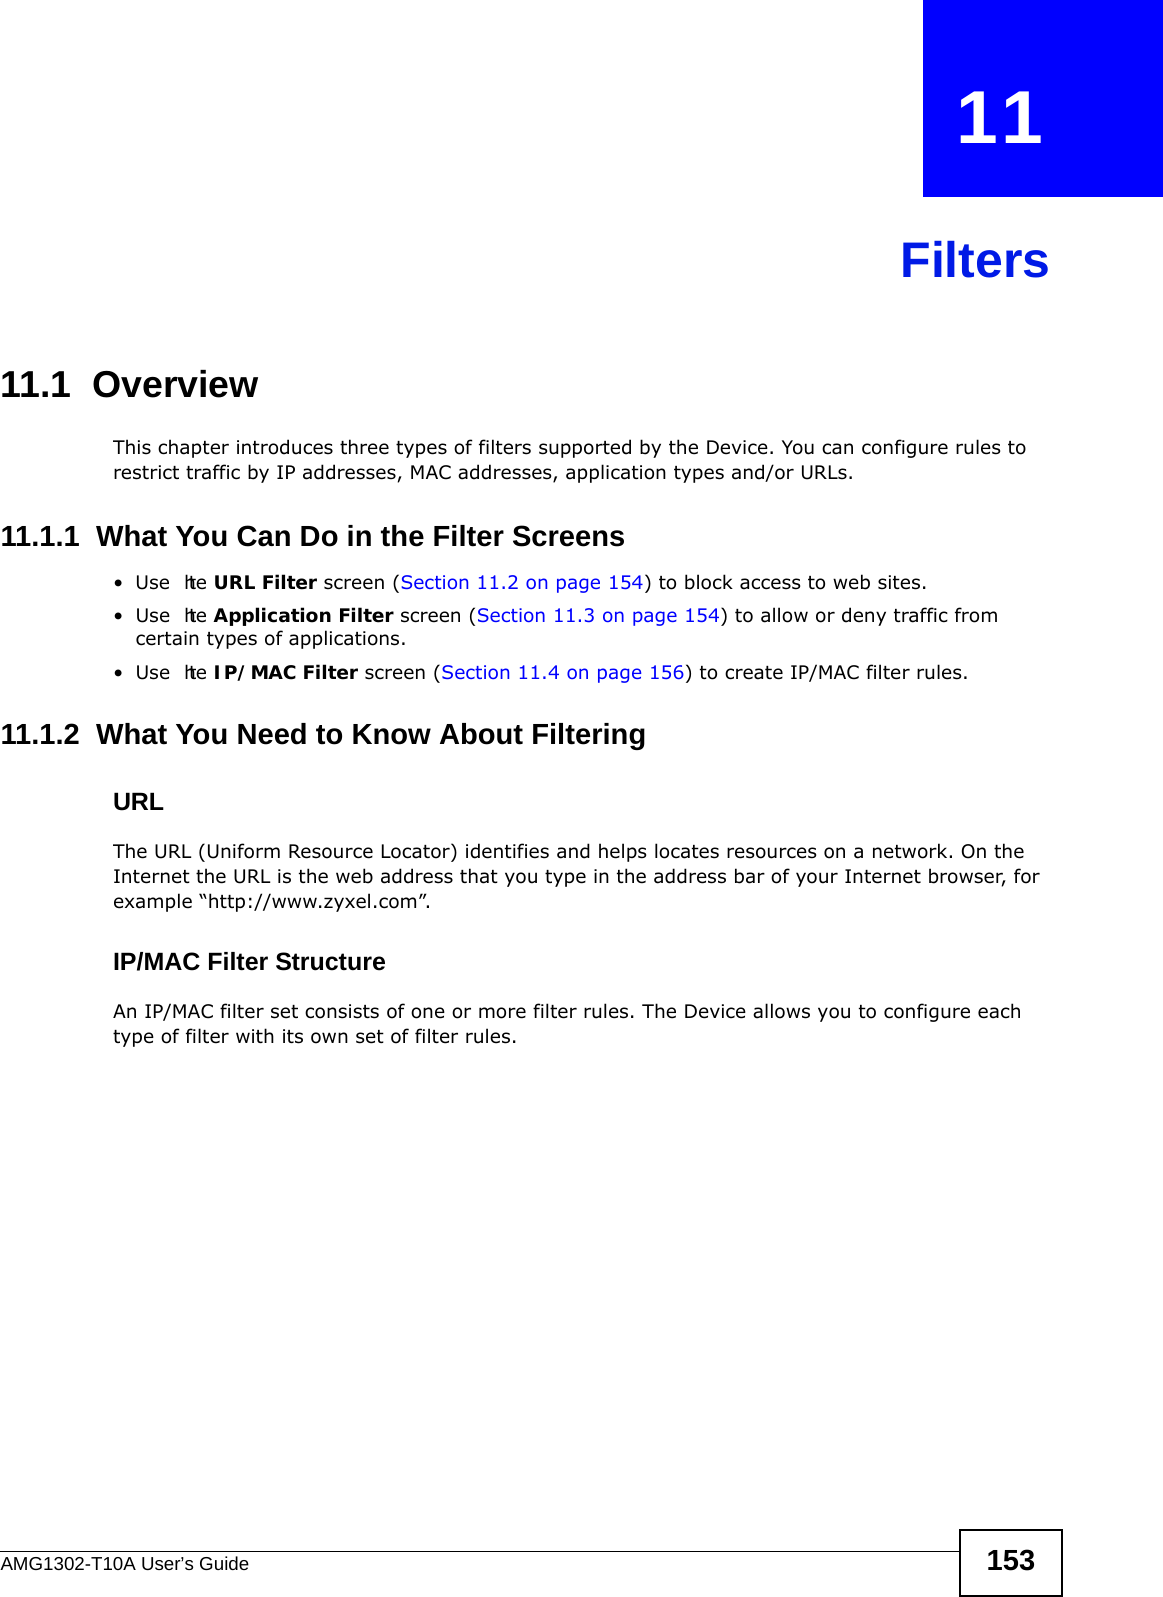 AMG1302-T10A User’s Guide 153CHAPTER   11Filters11.1  Overview This chapter introduces three types of filters supported by the Device. You can configure rules to restrict traffic by IP addresses, MAC addresses, application types and/or URLs.11.1.1  What You Can Do in the Filter Screens•Use  the URL Filter screen (Section 11.2 on page 154) to block access to web sites.•Use  the Application Filter screen (Section 11.3 on page 154) to allow or deny traffic from certain types of applications.•Use  the IP/MAC Filter screen (Section 11.4 on page 156) to create IP/MAC filter rules.11.1.2  What You Need to Know About FilteringURLThe URL (Uniform Resource Locator) identifies and helps locates resources on a network. On the Internet the URL is the web address that you type in the address bar of your Internet browser, for example “http://www.zyxel.com”.IP/MAC Filter StructureAn IP/MAC filter set consists of one or more filter rules. The Device allows you to configure each type of filter with its own set of filter rules.